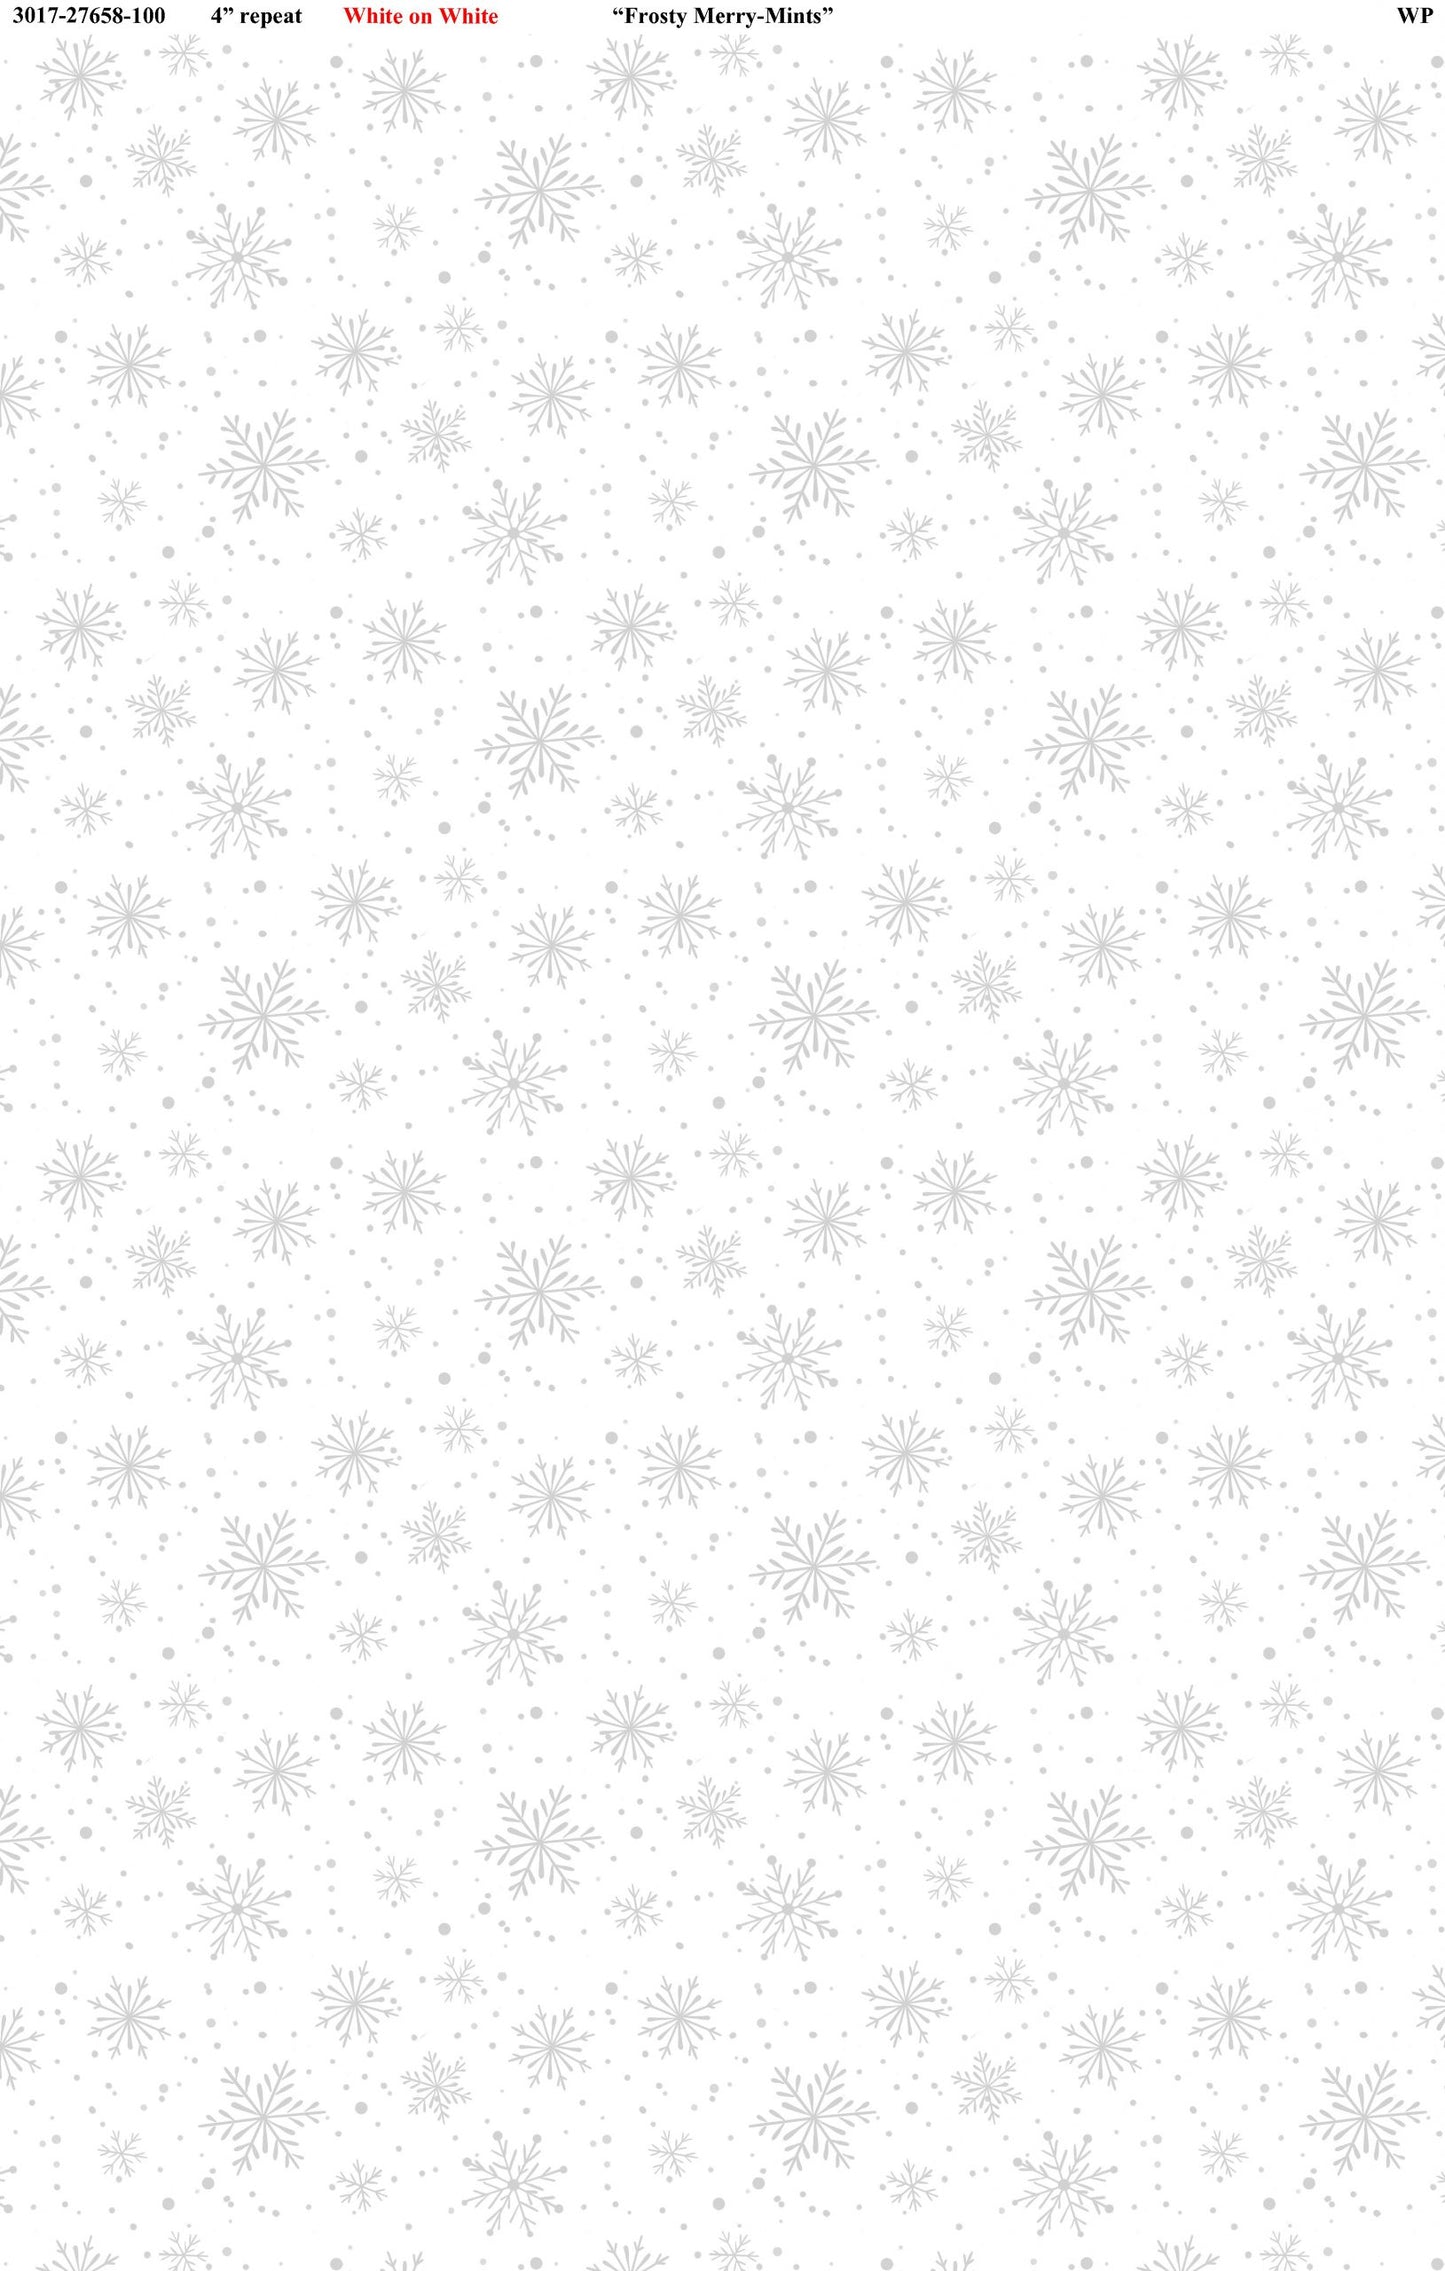 Frosty Merry-Mints Snowflakes White By Danielle Leone For Wilmington Prints